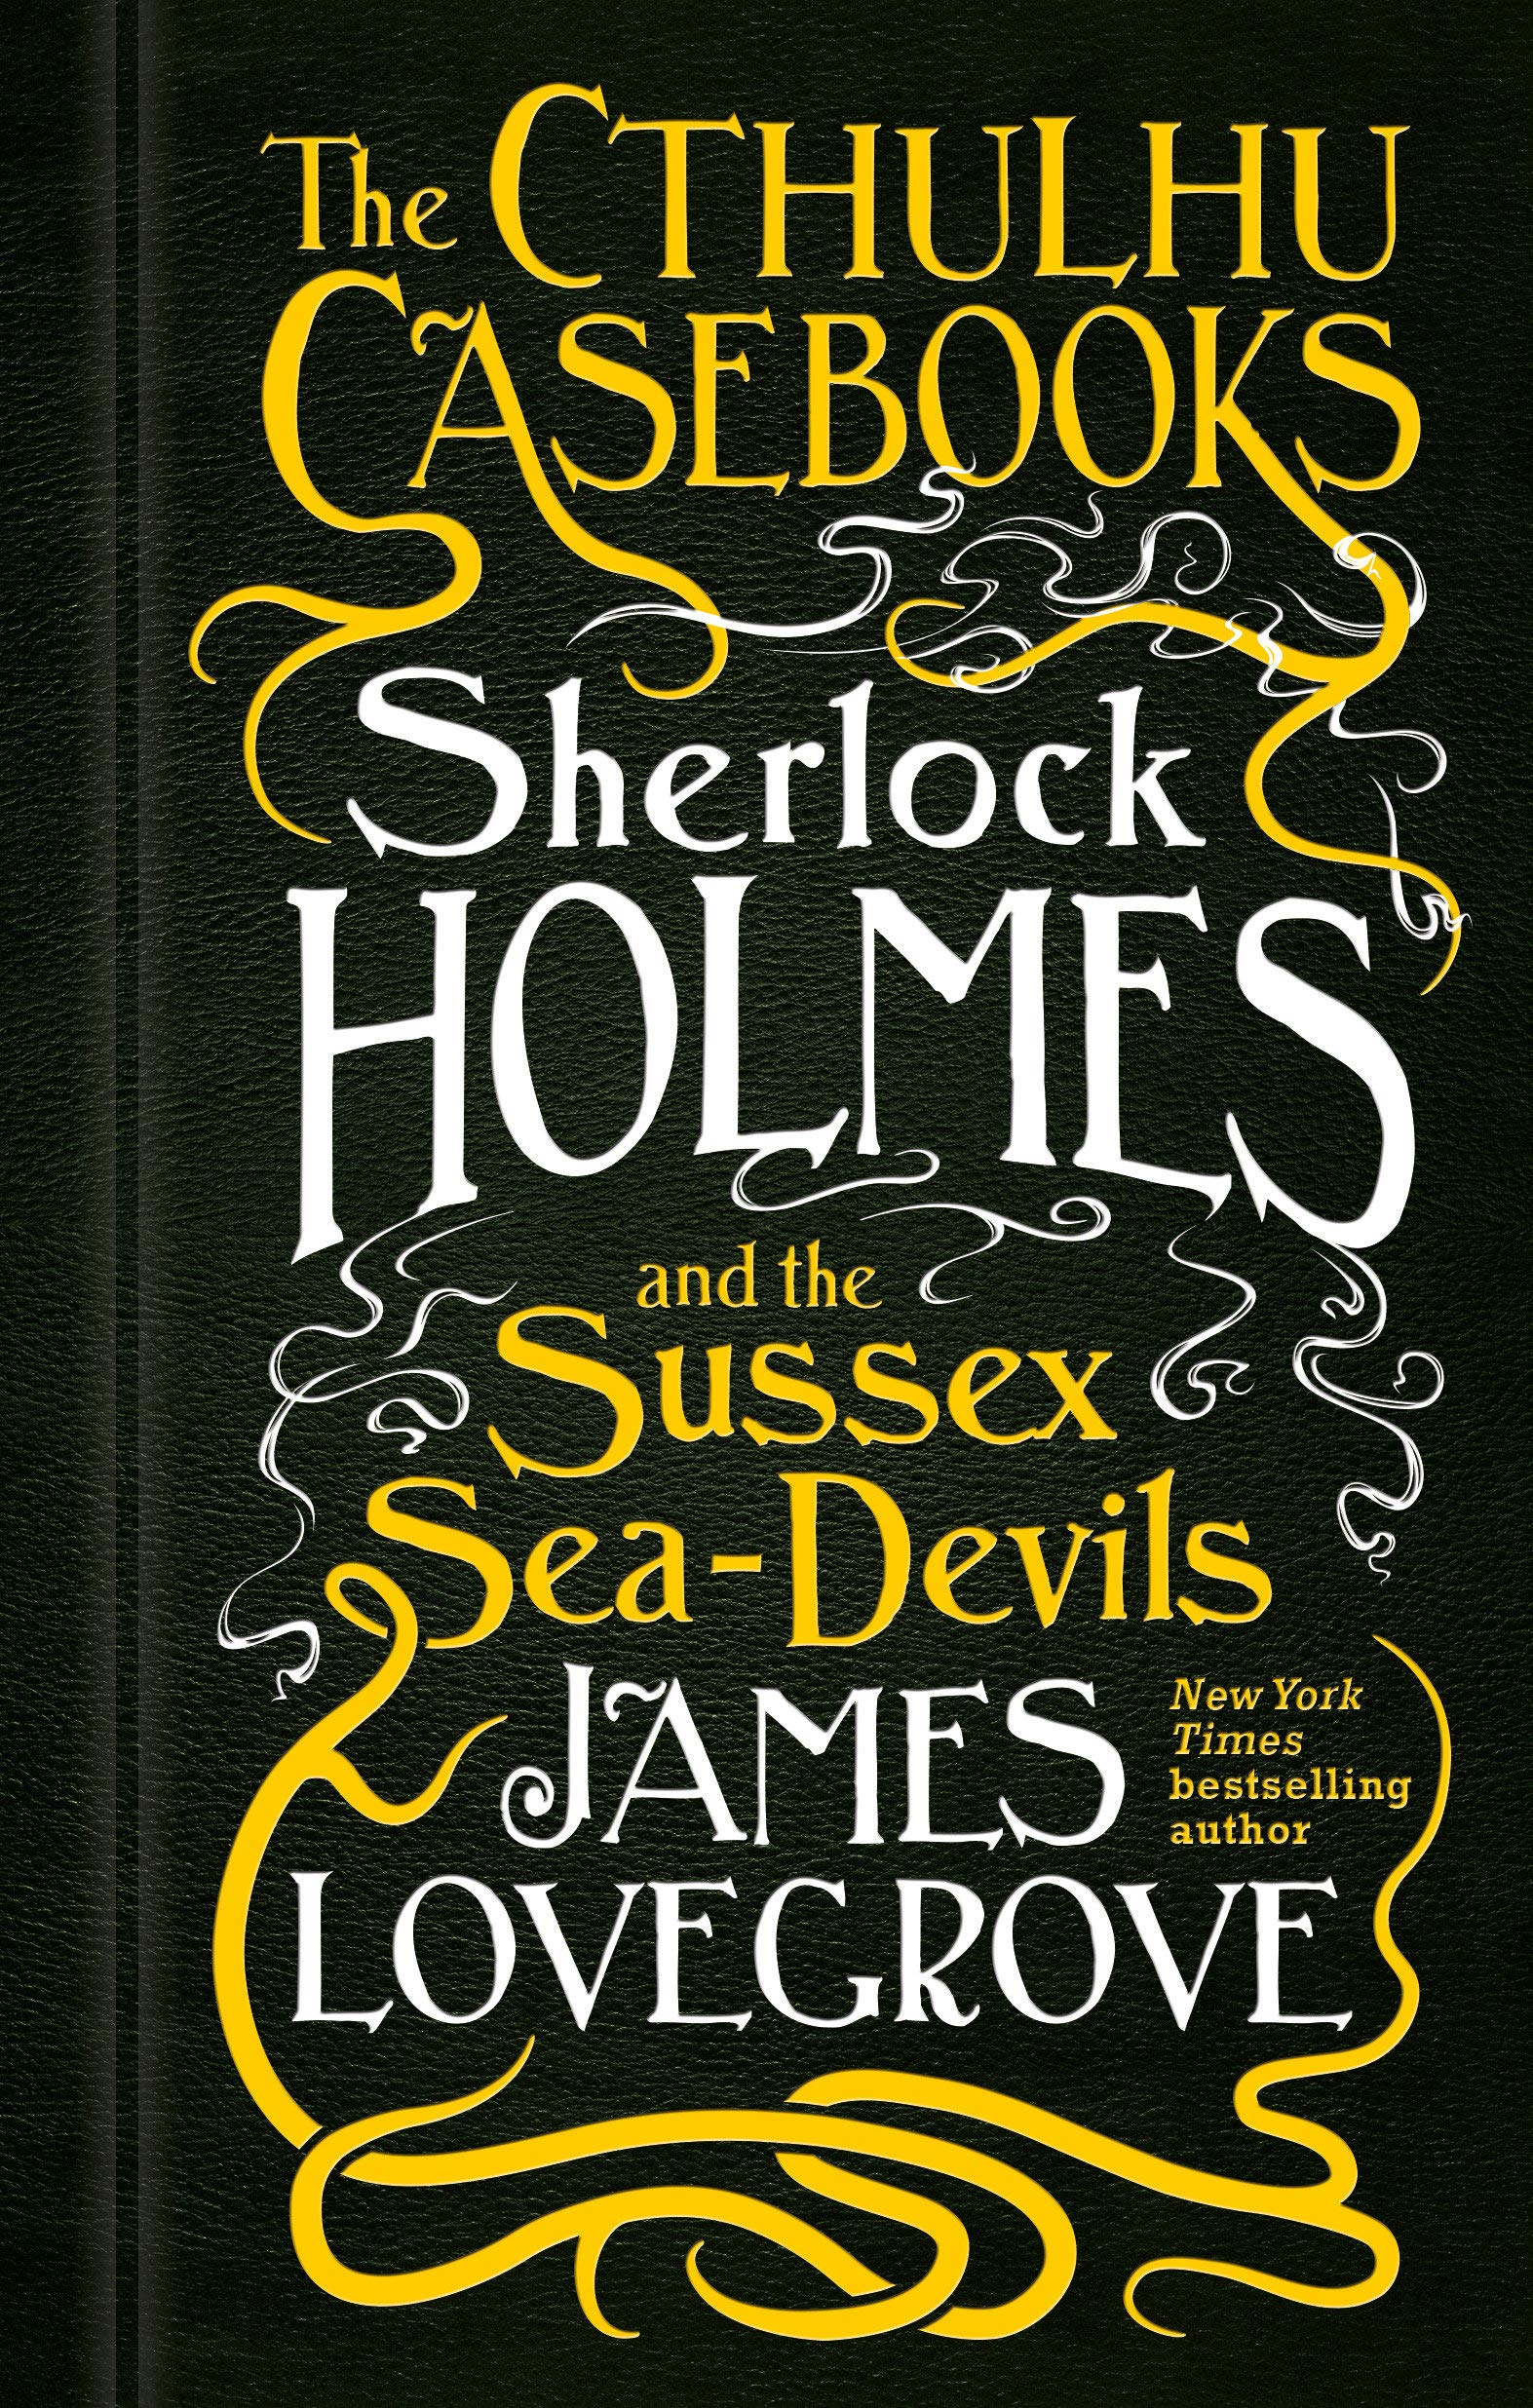 Cthulhu Casebooks - Sherlock Holmes and the Sussex Sea-Devils | James Lovegrove